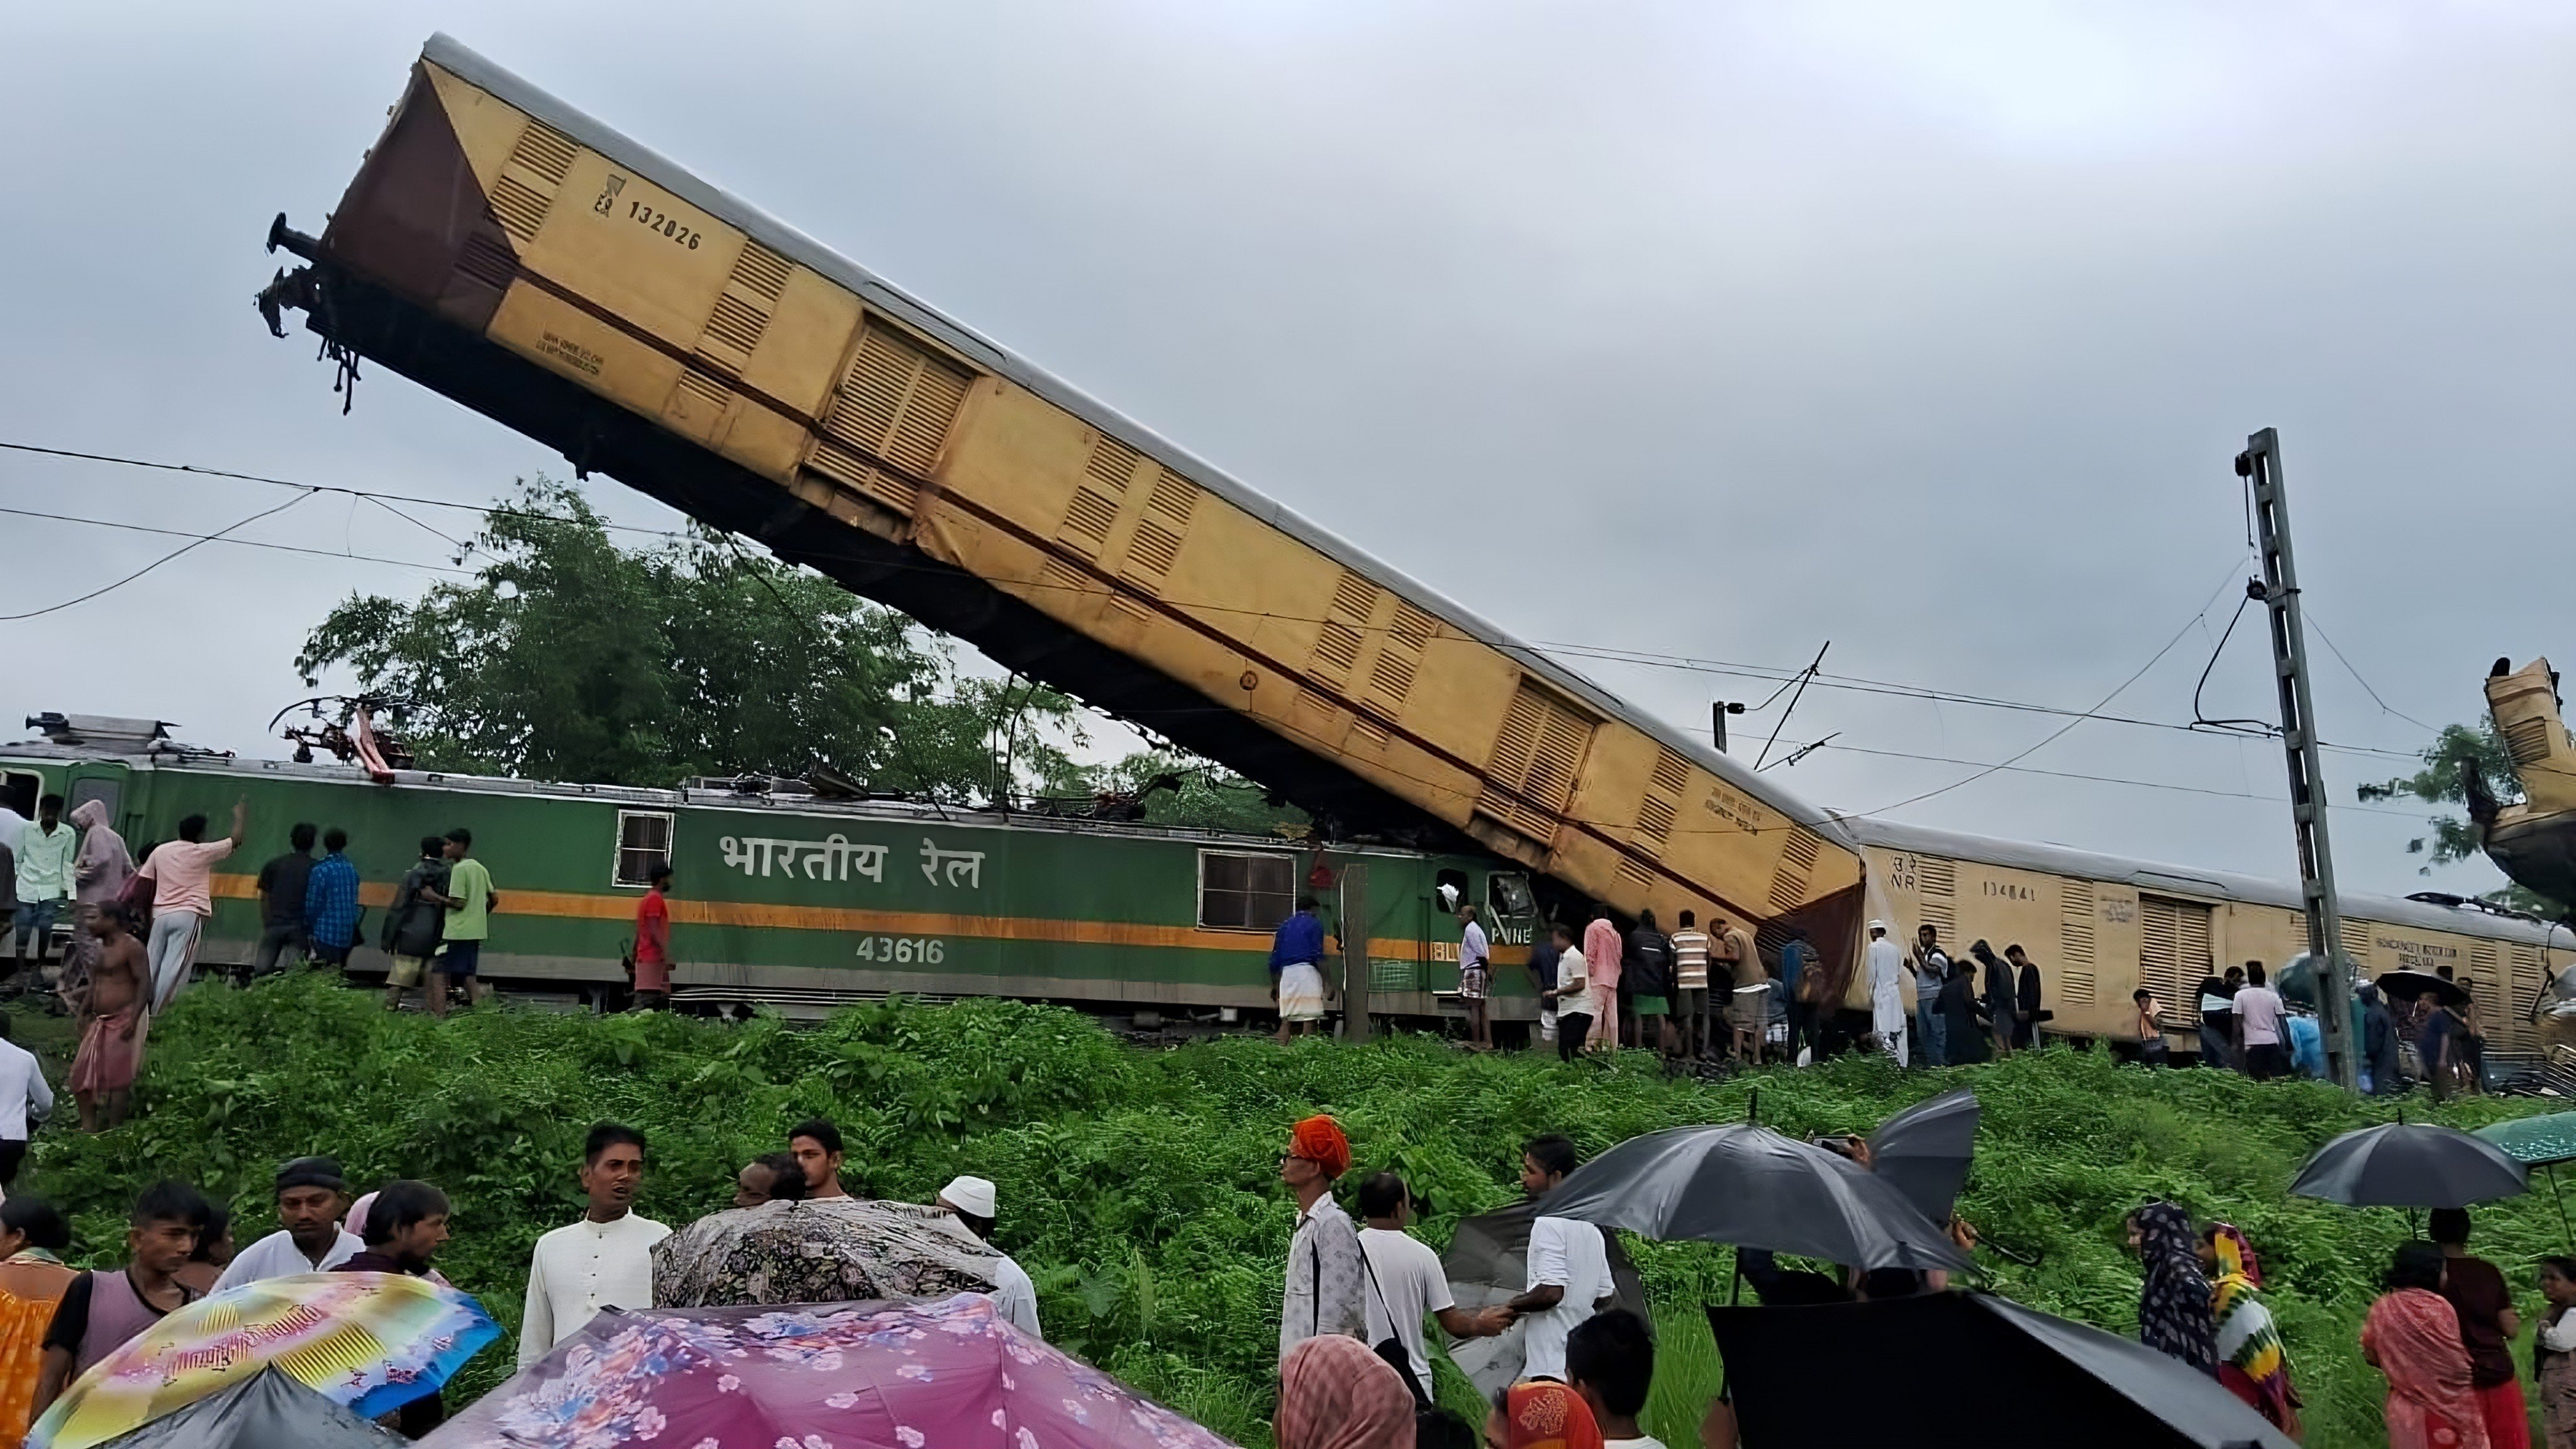 One train involved in the crash on Monday rammed into the end of the other, sending a compartment rising vertically into the air. Photo: X/Nher_who